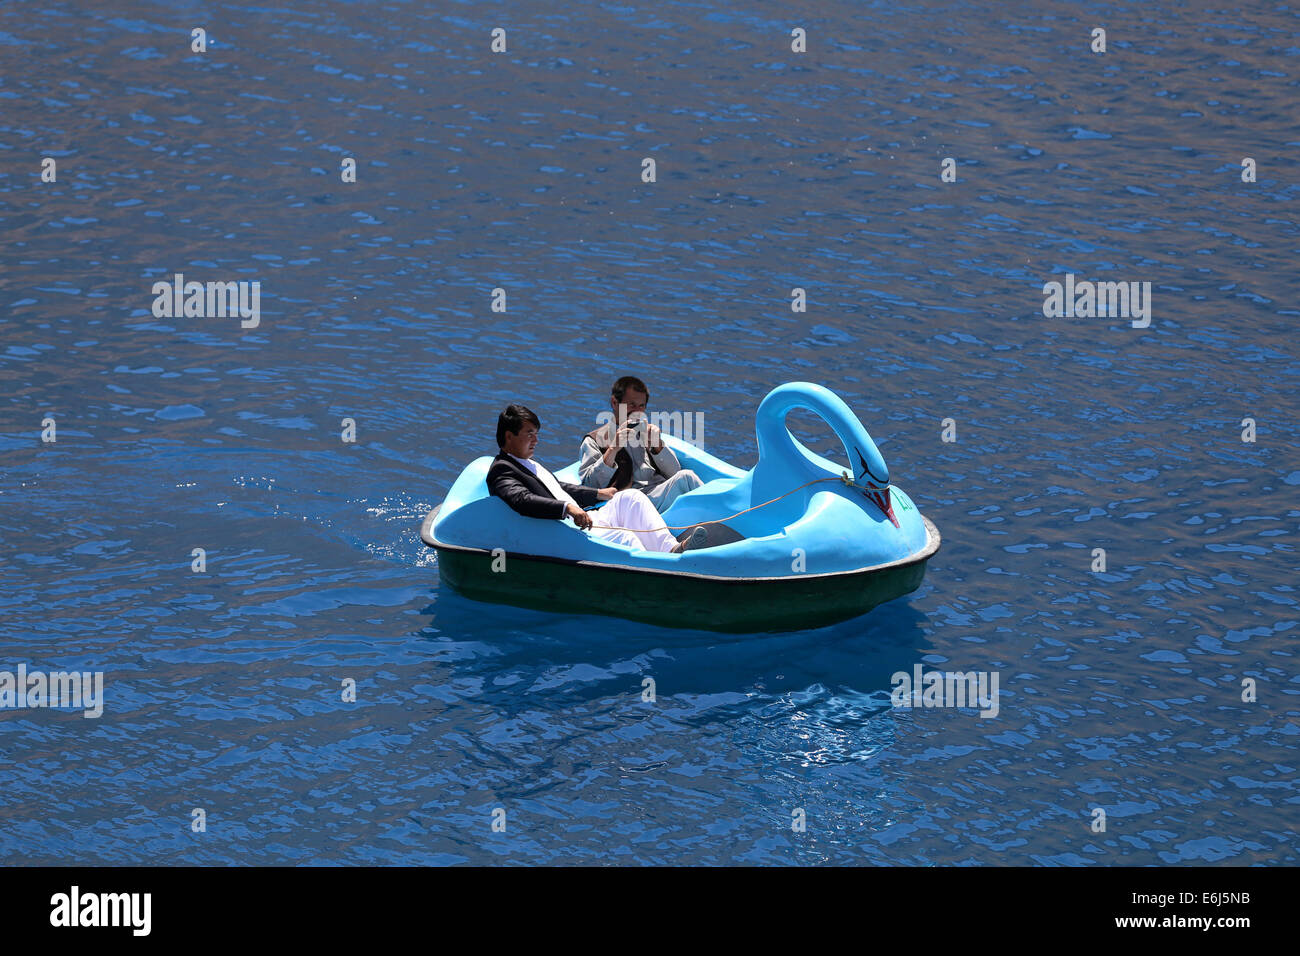 (140825) -- BAMYAN, Aug. 25, 2014 (Xinhua) -- Afghans enjoy boating in the Band-e-Amir Lake in Bamyan, central Afghanistan, on Aug. 23, 2014. (Xinhua/Kamran) Stock Photo